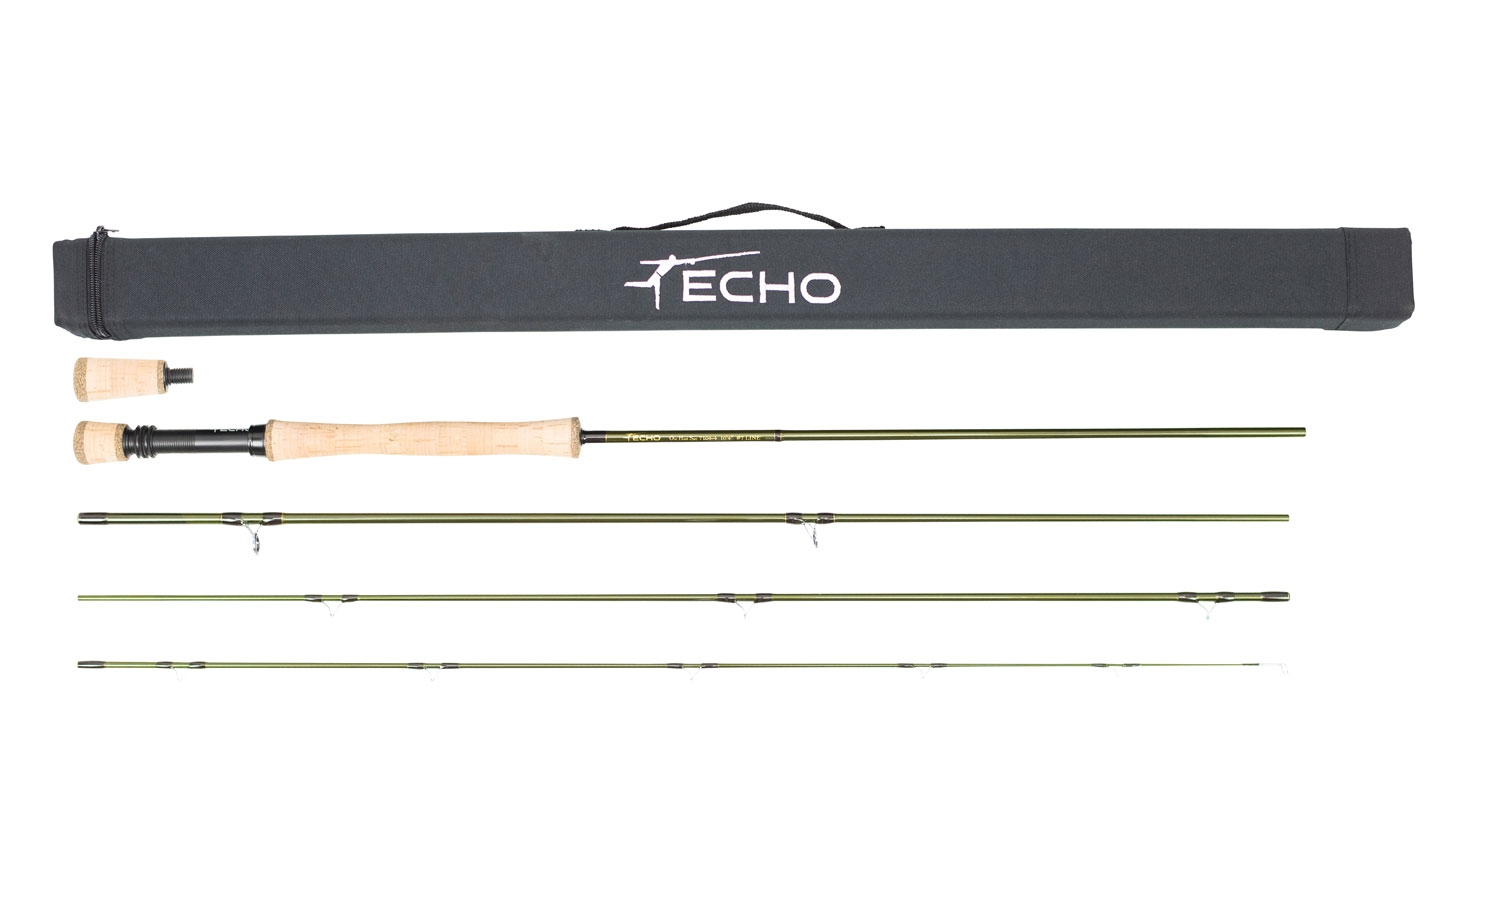 Echo OHS - One Hand Spey Rod - Echo Fly Rods - Alaska Fly Fishing Goods